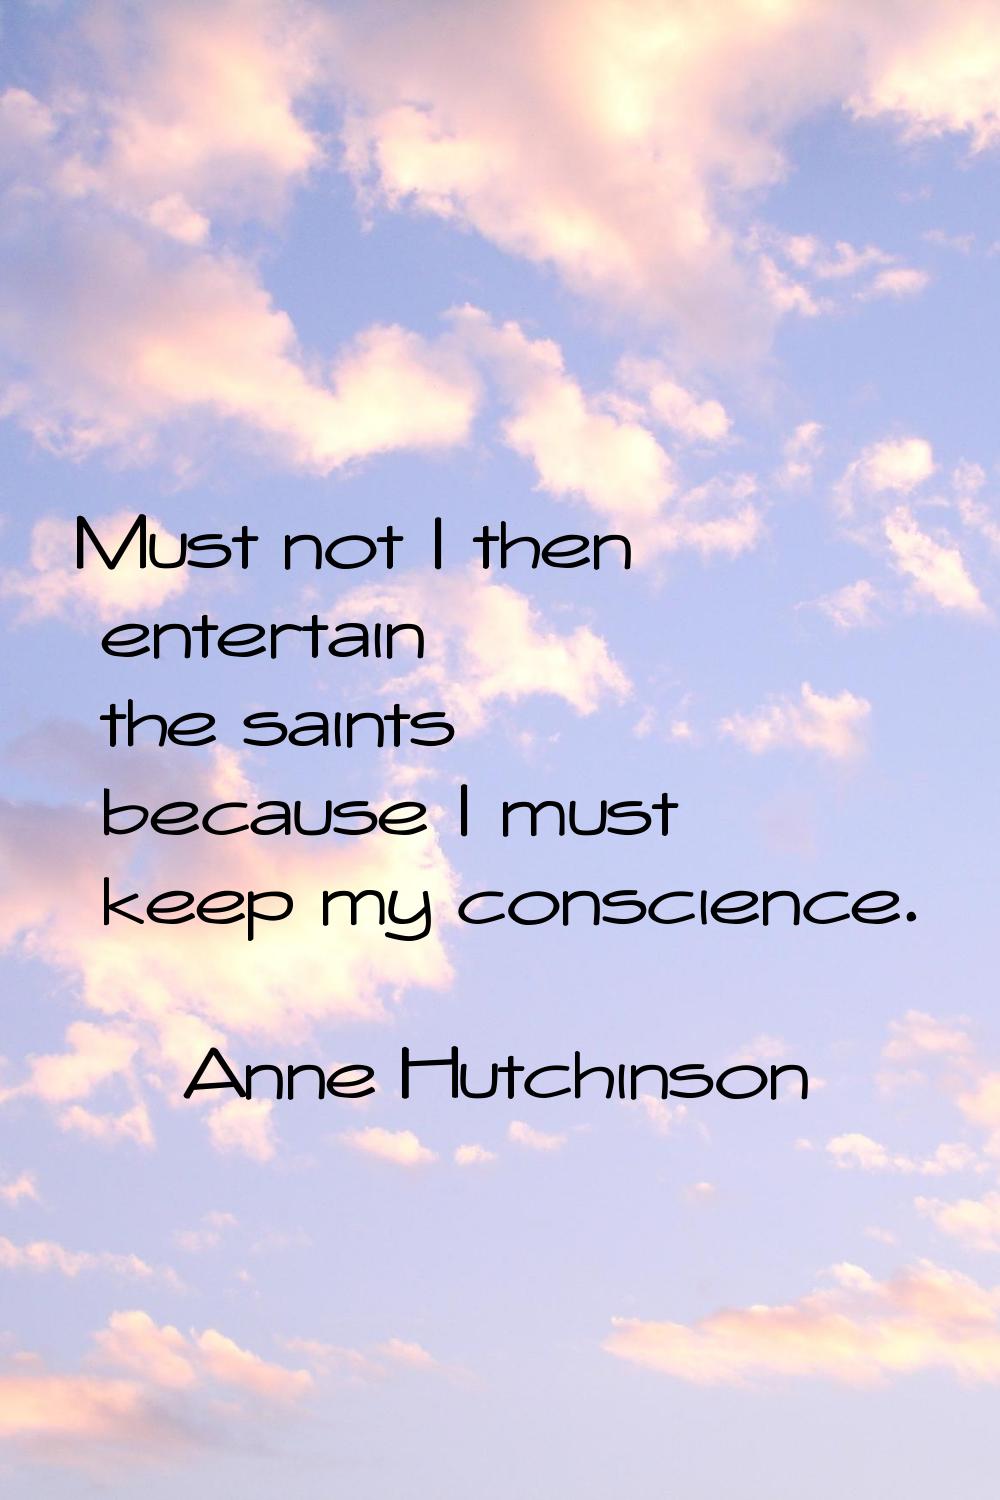 Must not I then entertain the saints because I must keep my conscience.